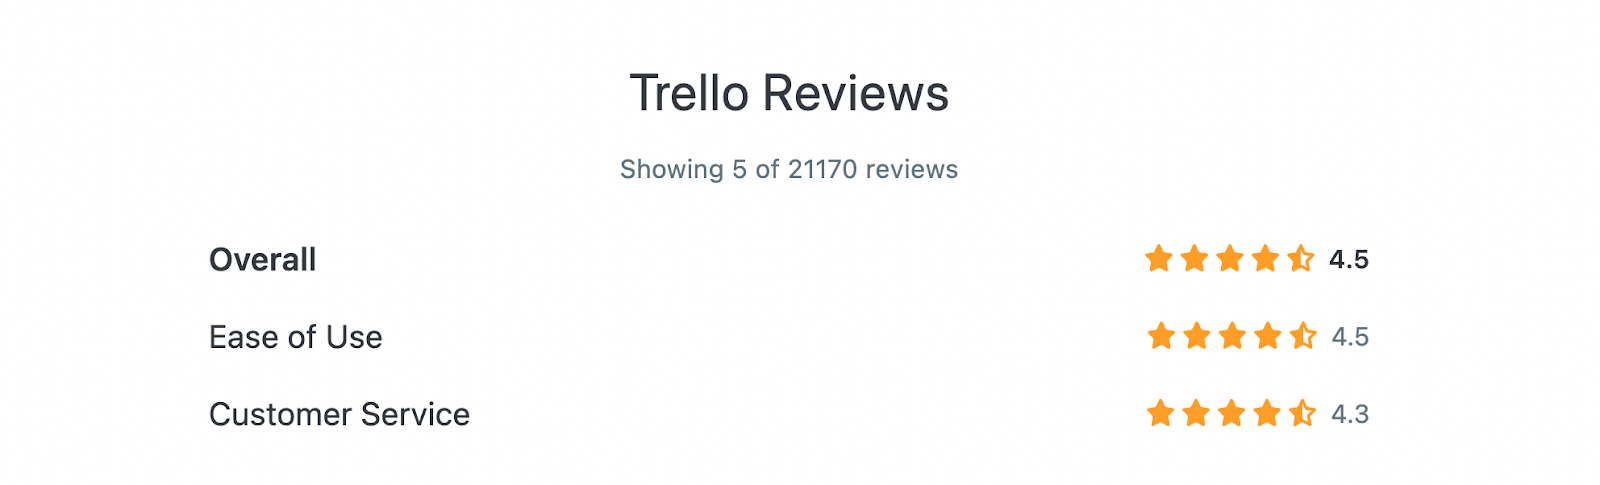 Trello reviews on Capterra (Overall: 4.5, Ease of Use: 4.5, Customer Service: 4.3)